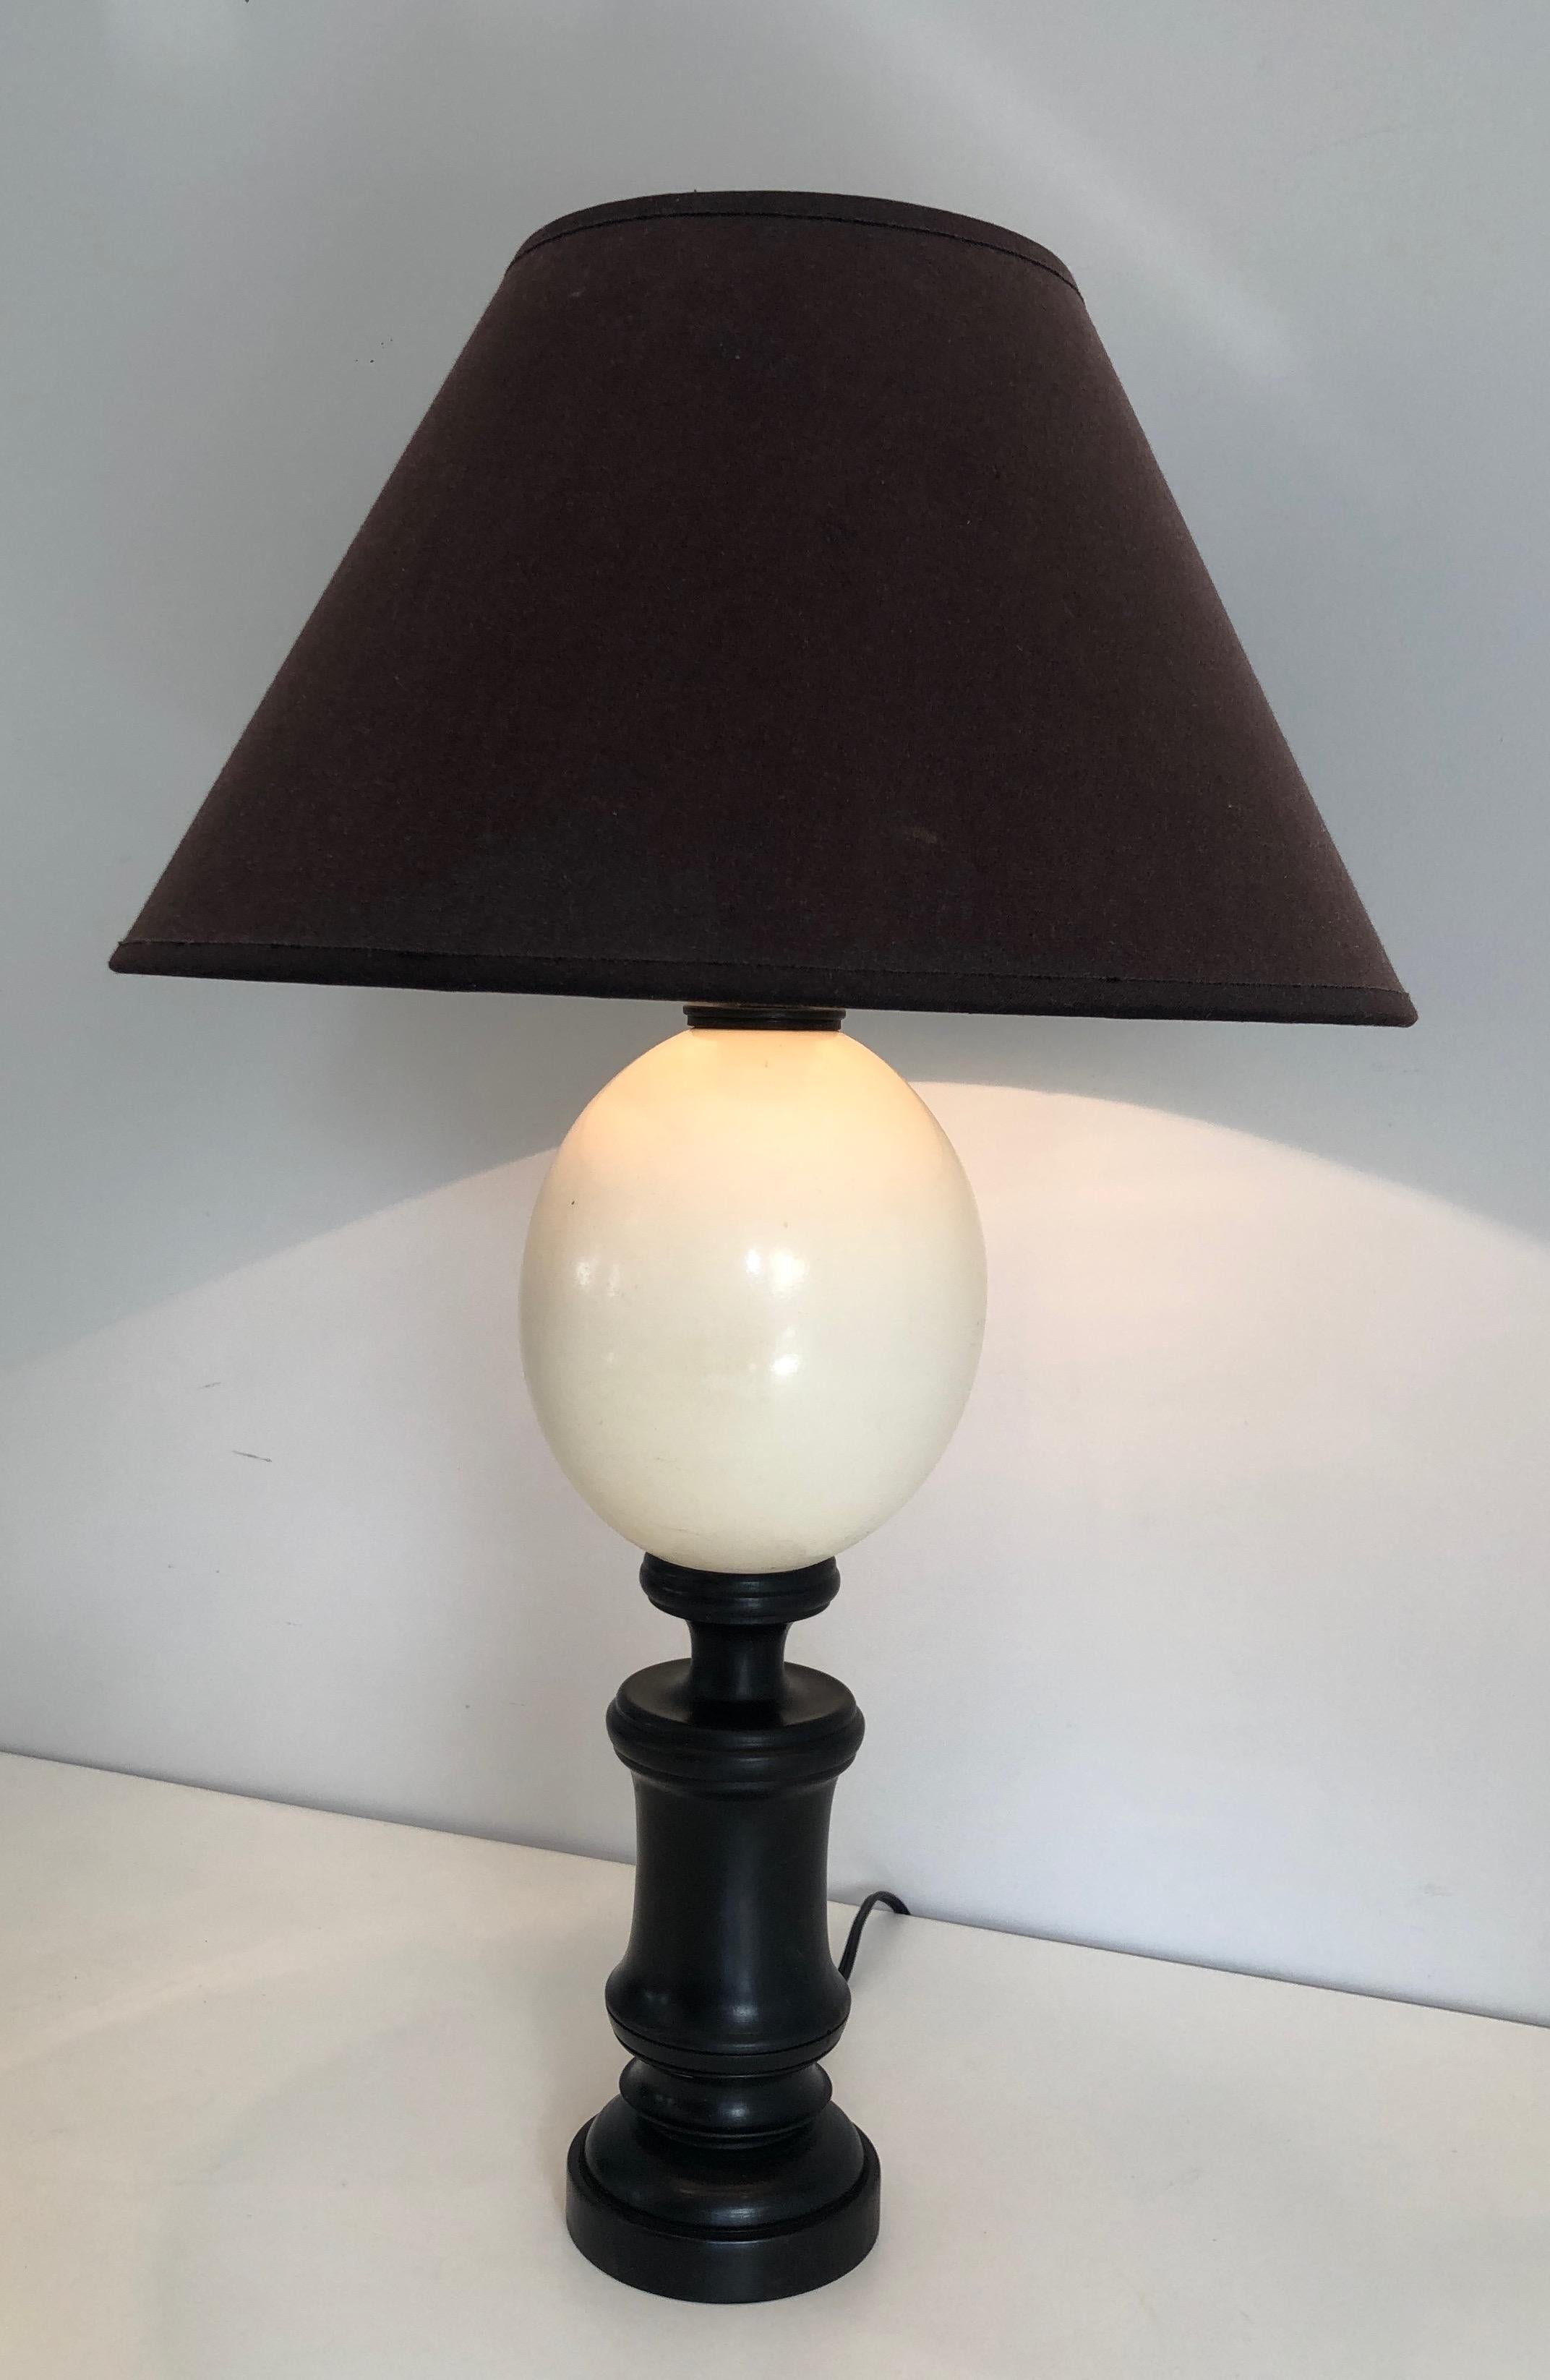 Blackened Wood and Ostrich Eggshell Table Lamp, French Work, Circa 1970 For Sale 4